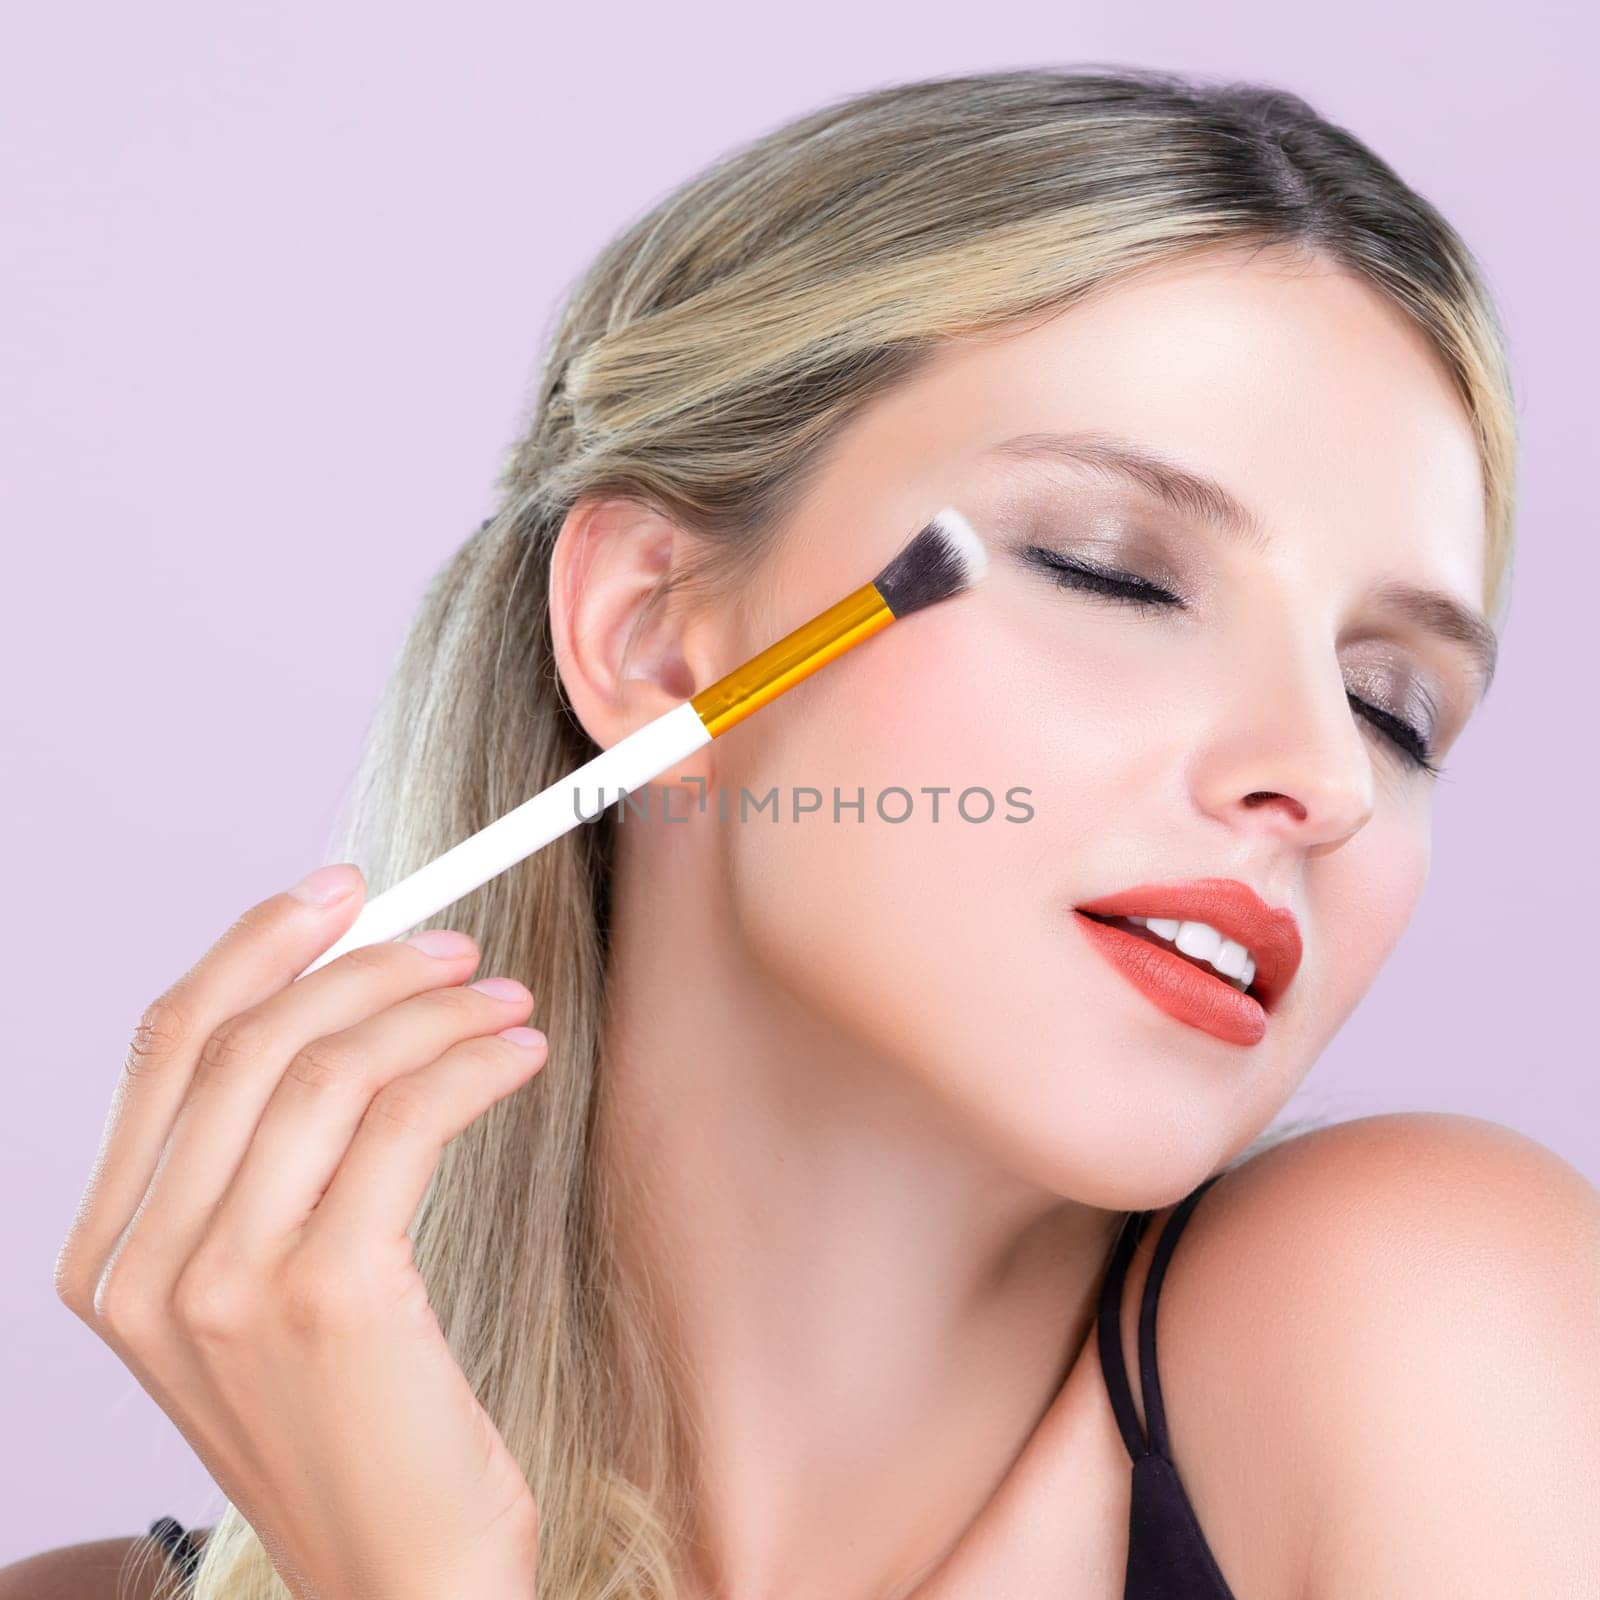 Closeup beautiful girl with flawless applying alluring eye shadow makeup with eyeliner brush. Cosmetic facial painting process on lovely young woman with perfect clean skin on pink isolated background